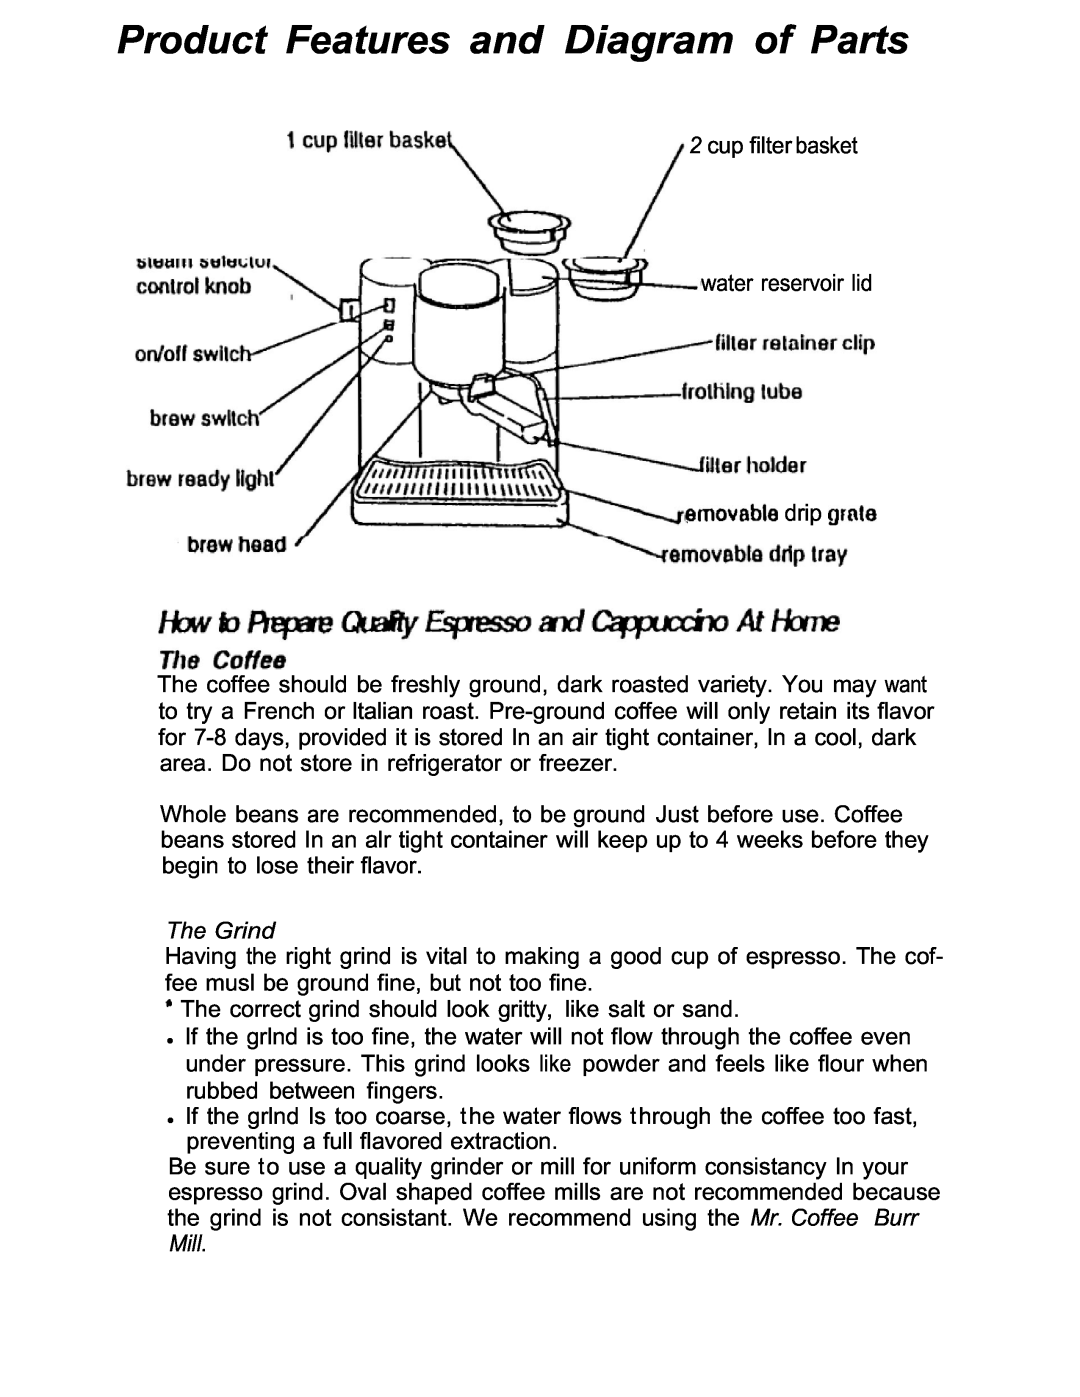 Mr. Coffee ECMP2 manual Product Features and Diagram of Parts, The Grind 